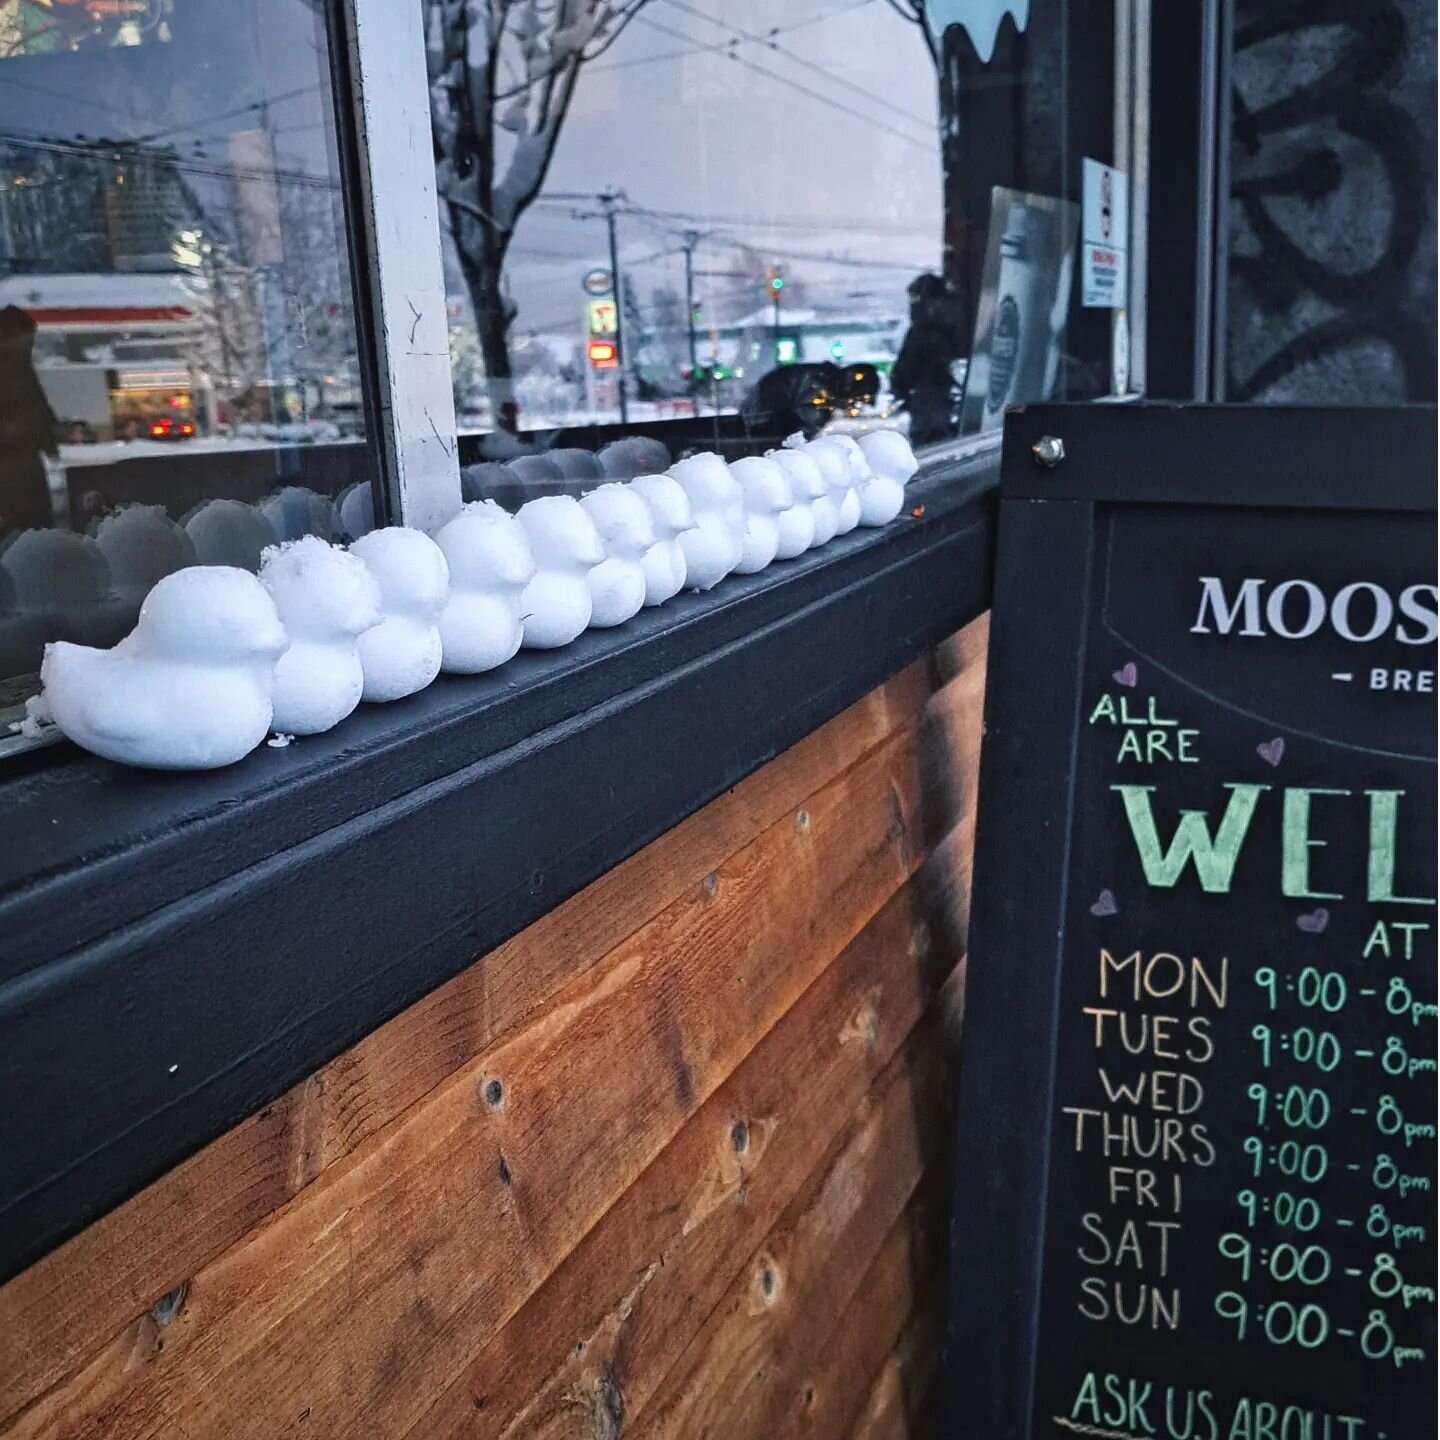 We have all our ducks in a row! The snow doesn't stop us. ❄️